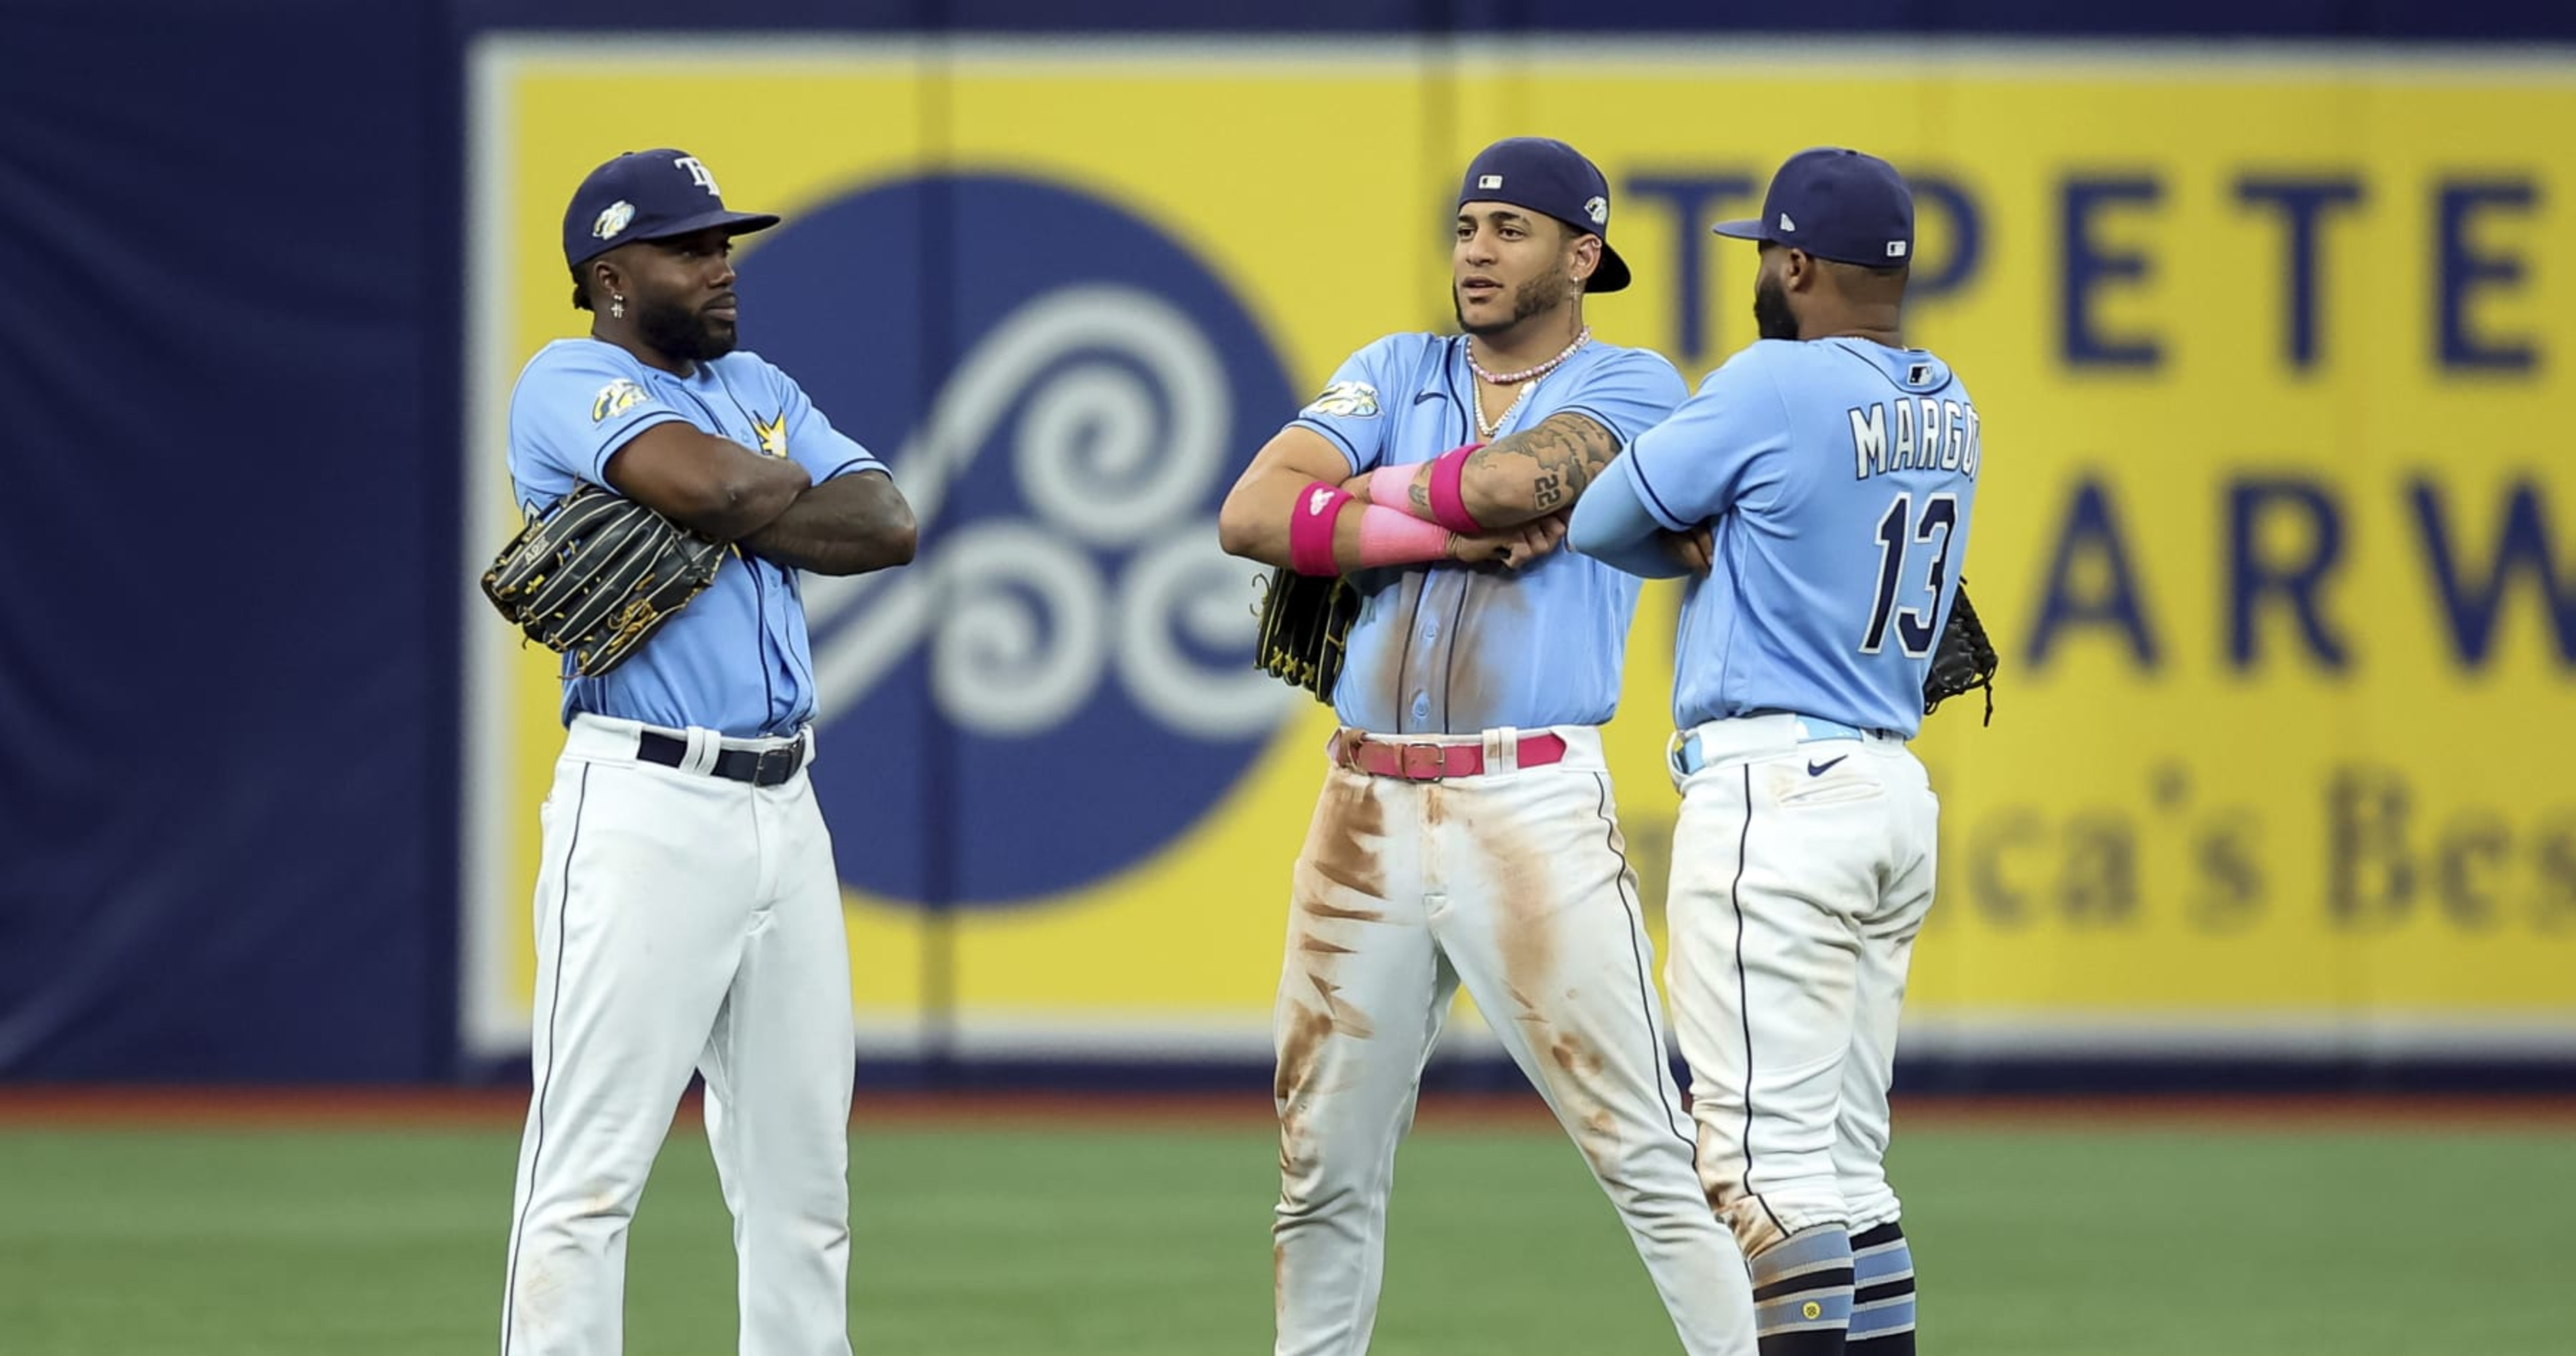 Athletics fall to Rays but split series with best team in baseball